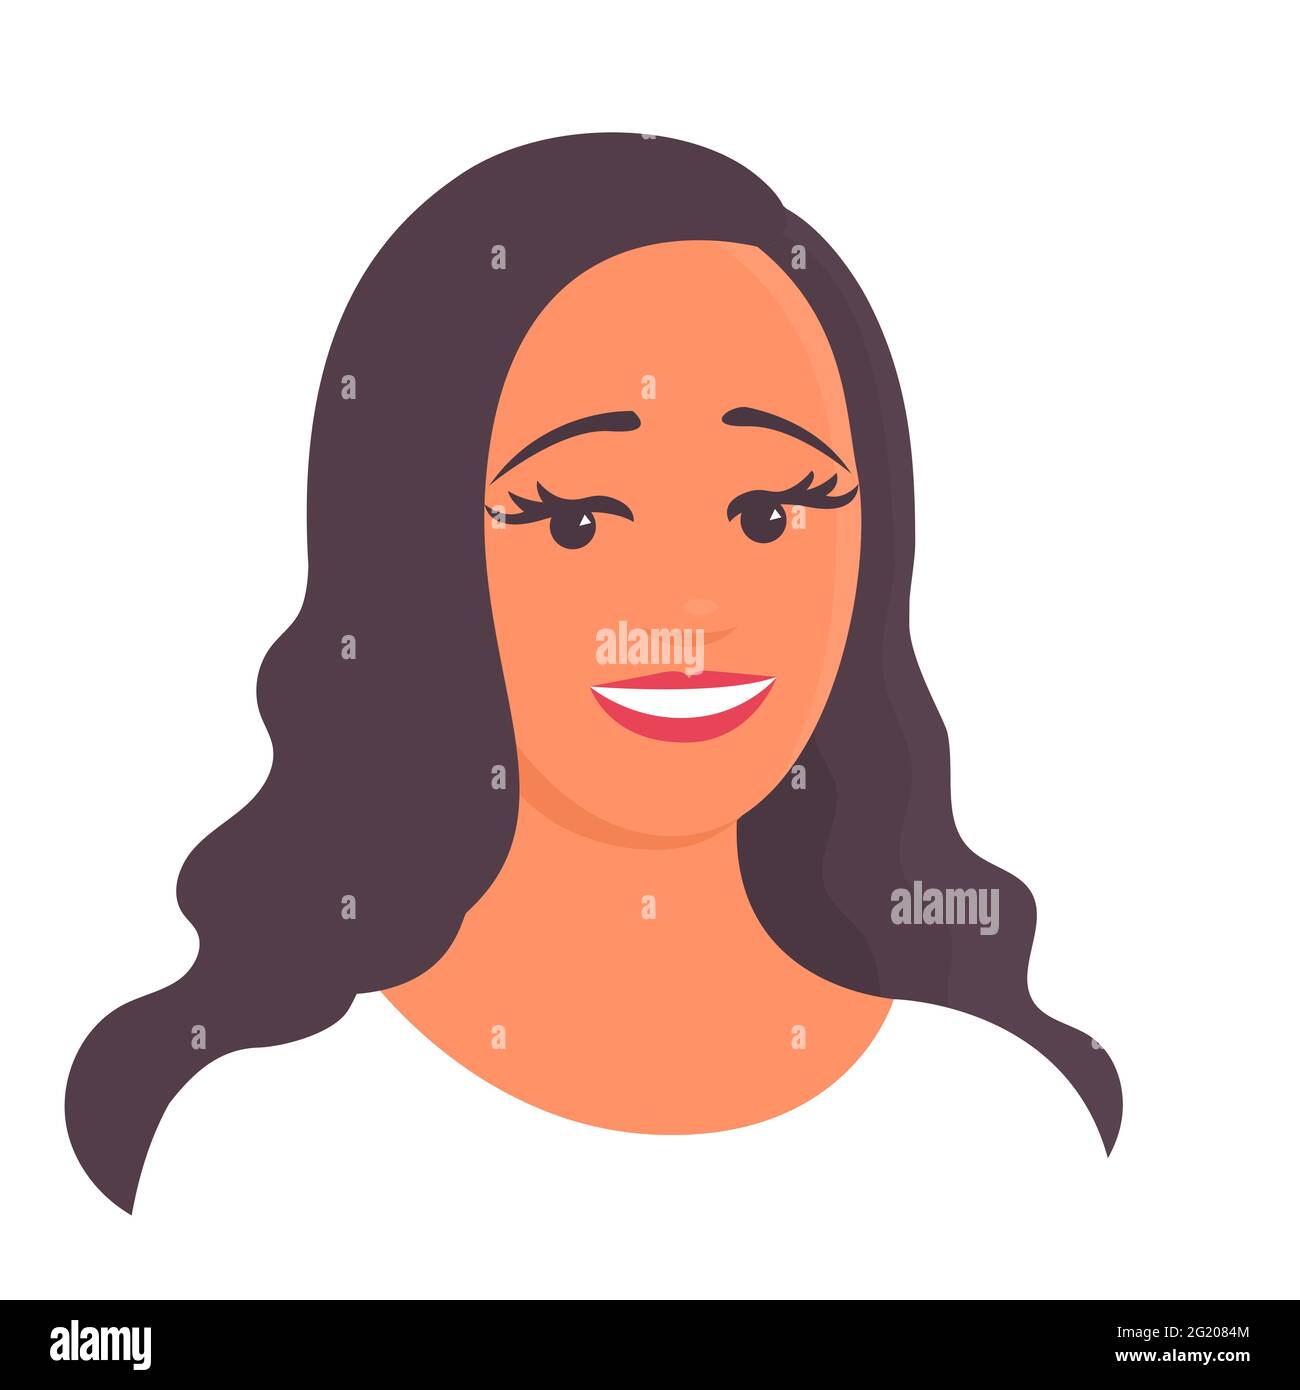 Young Beauty Girl With A Happy Smile On Her Face Vector Cartoon Illustration On White